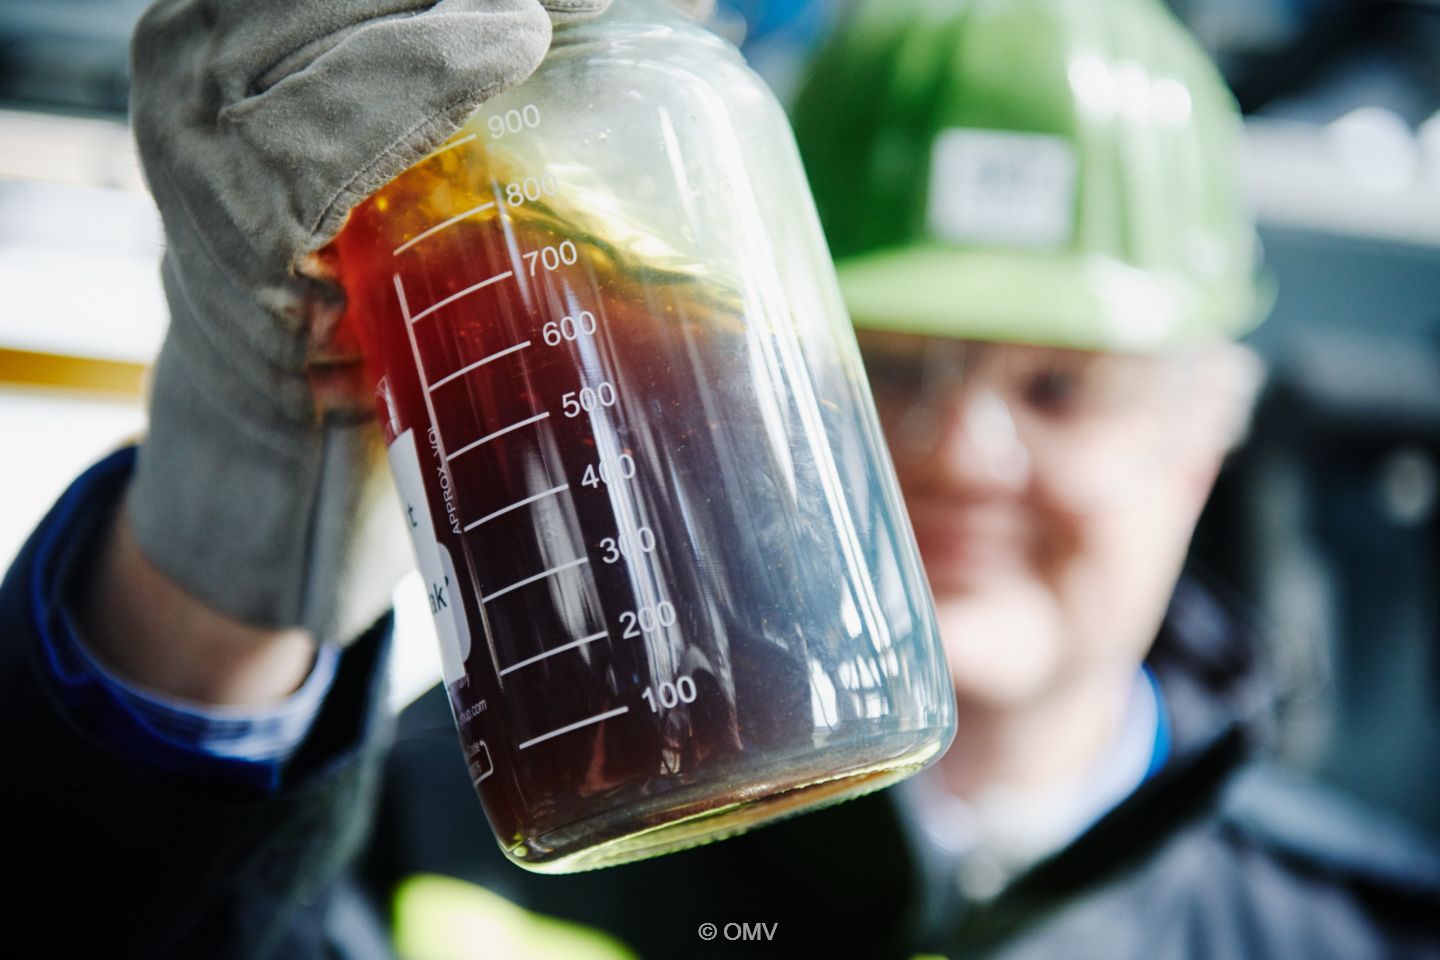 Person wearing a green hard hat holding a glass jar containing a brown liquid.